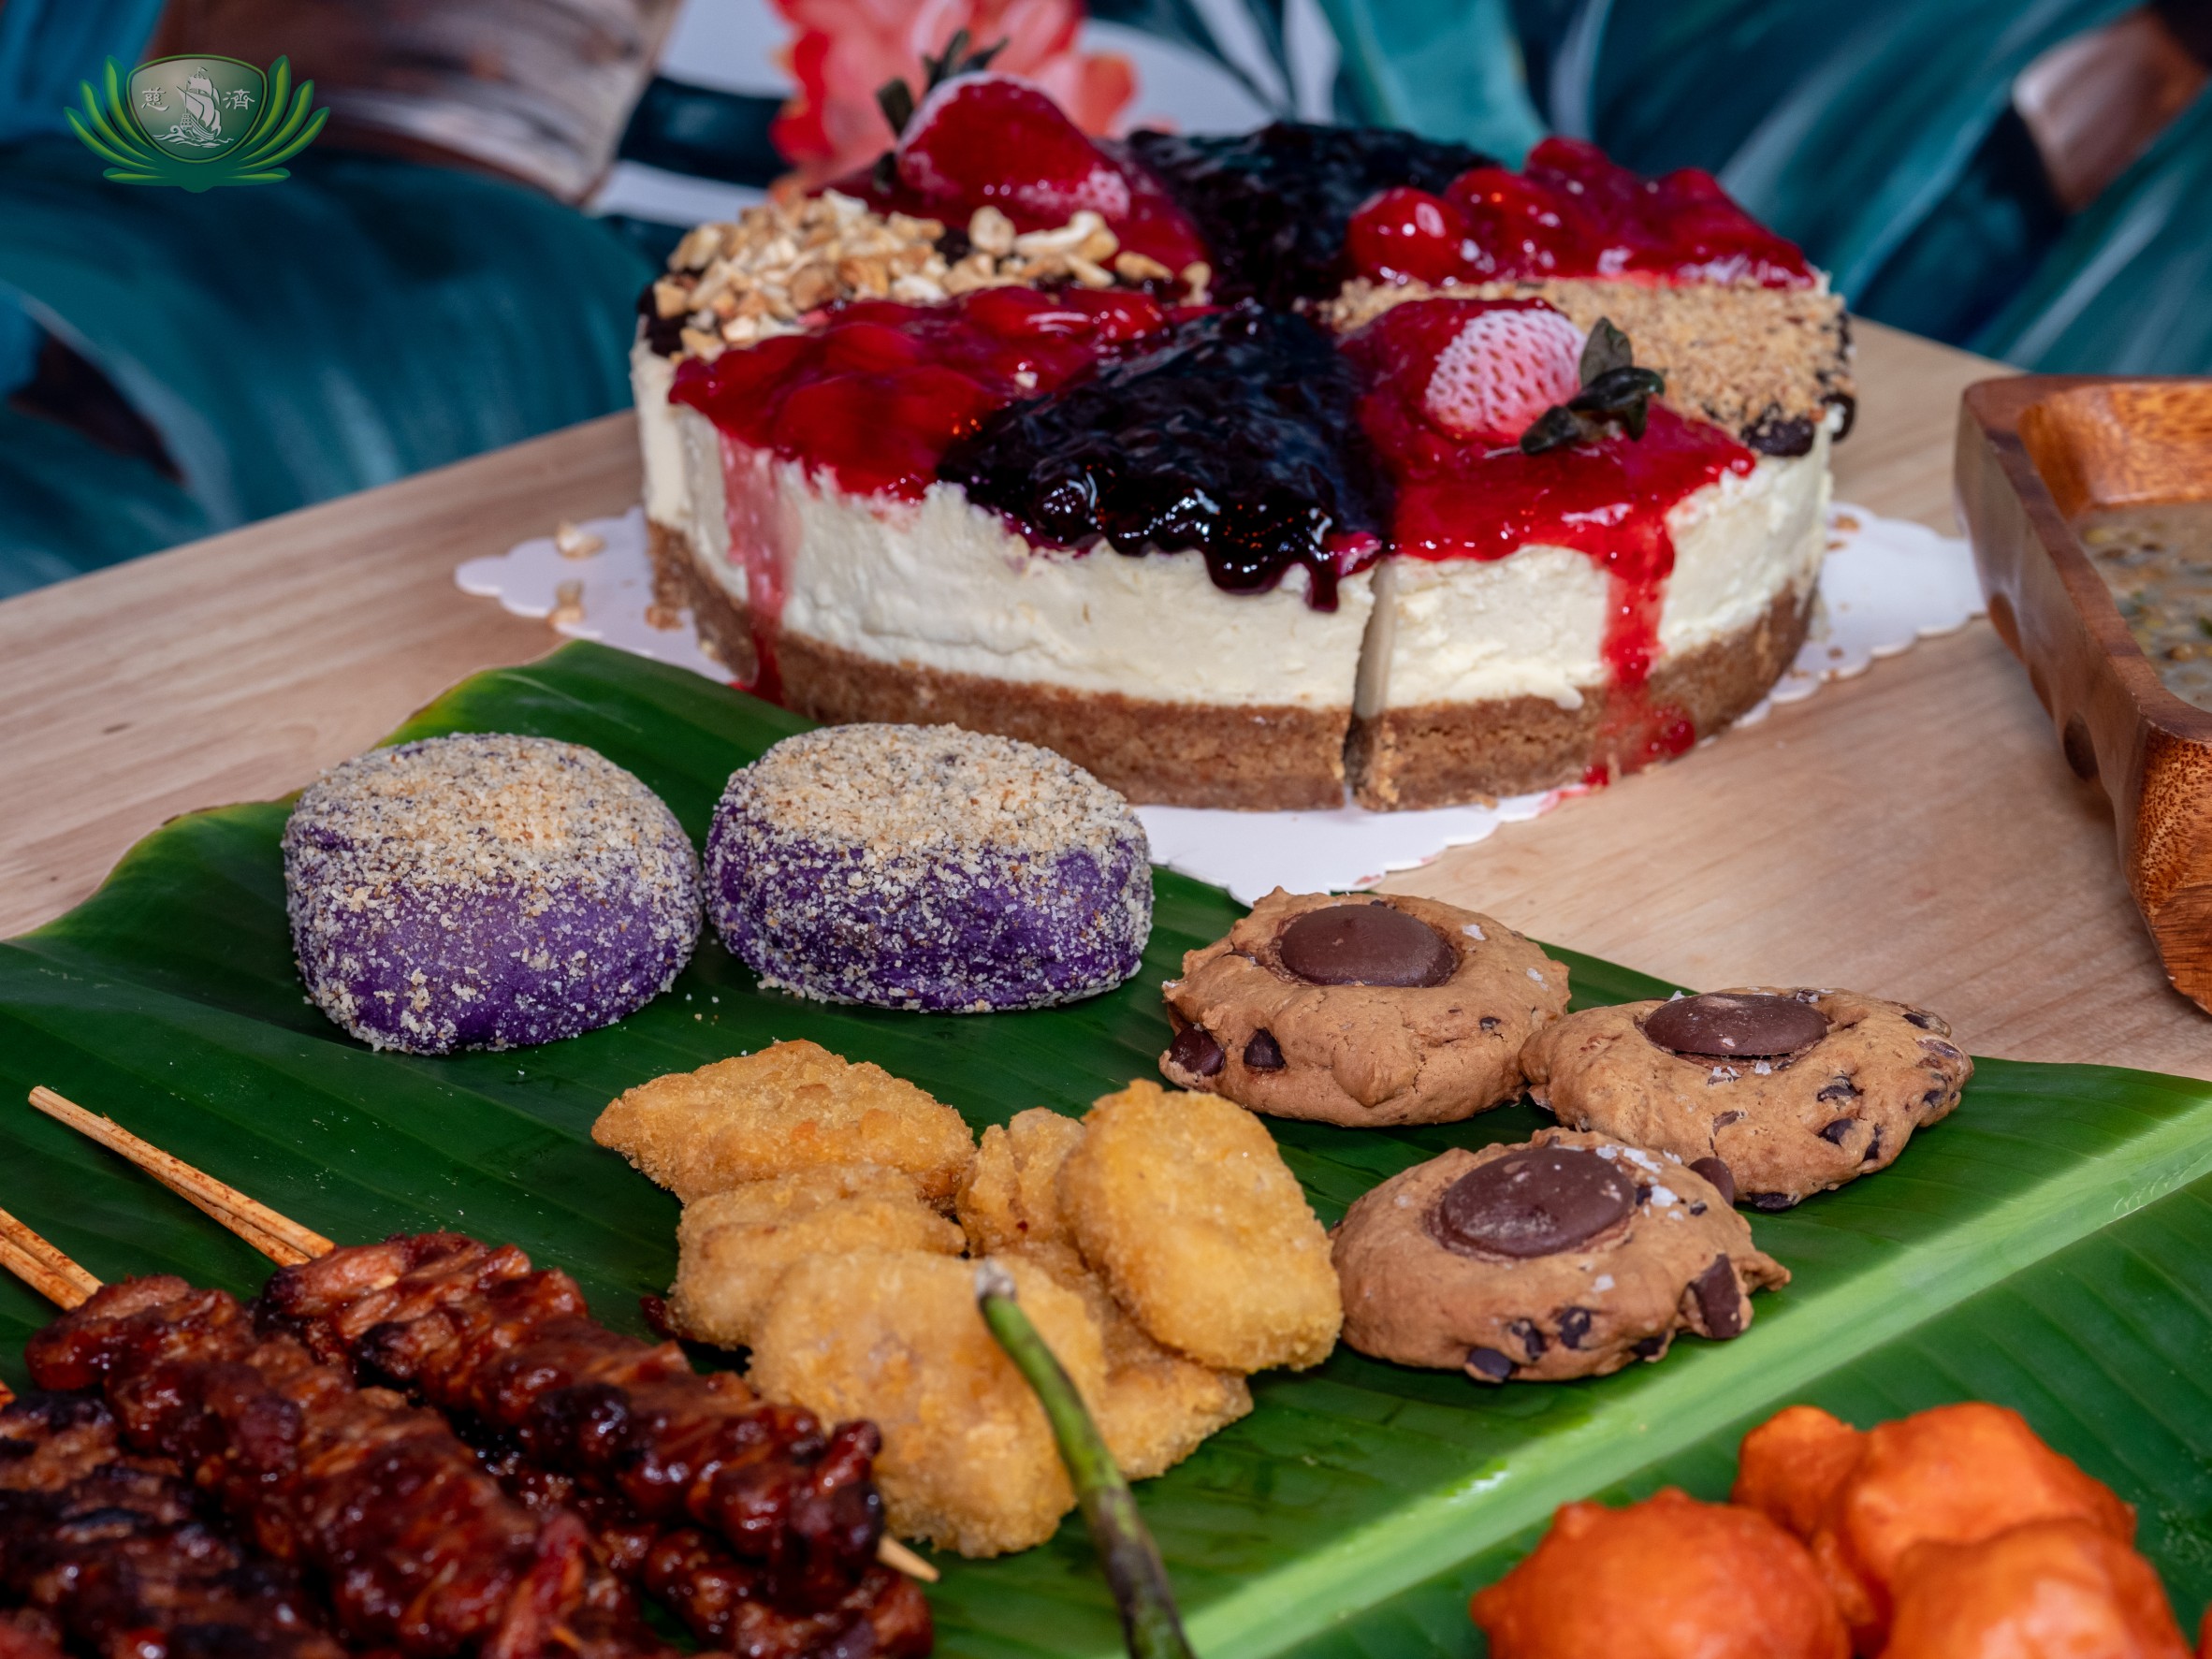 Vegan sweets and desserts, including vegan cheesecake, courtesy of The Vegan Grocer